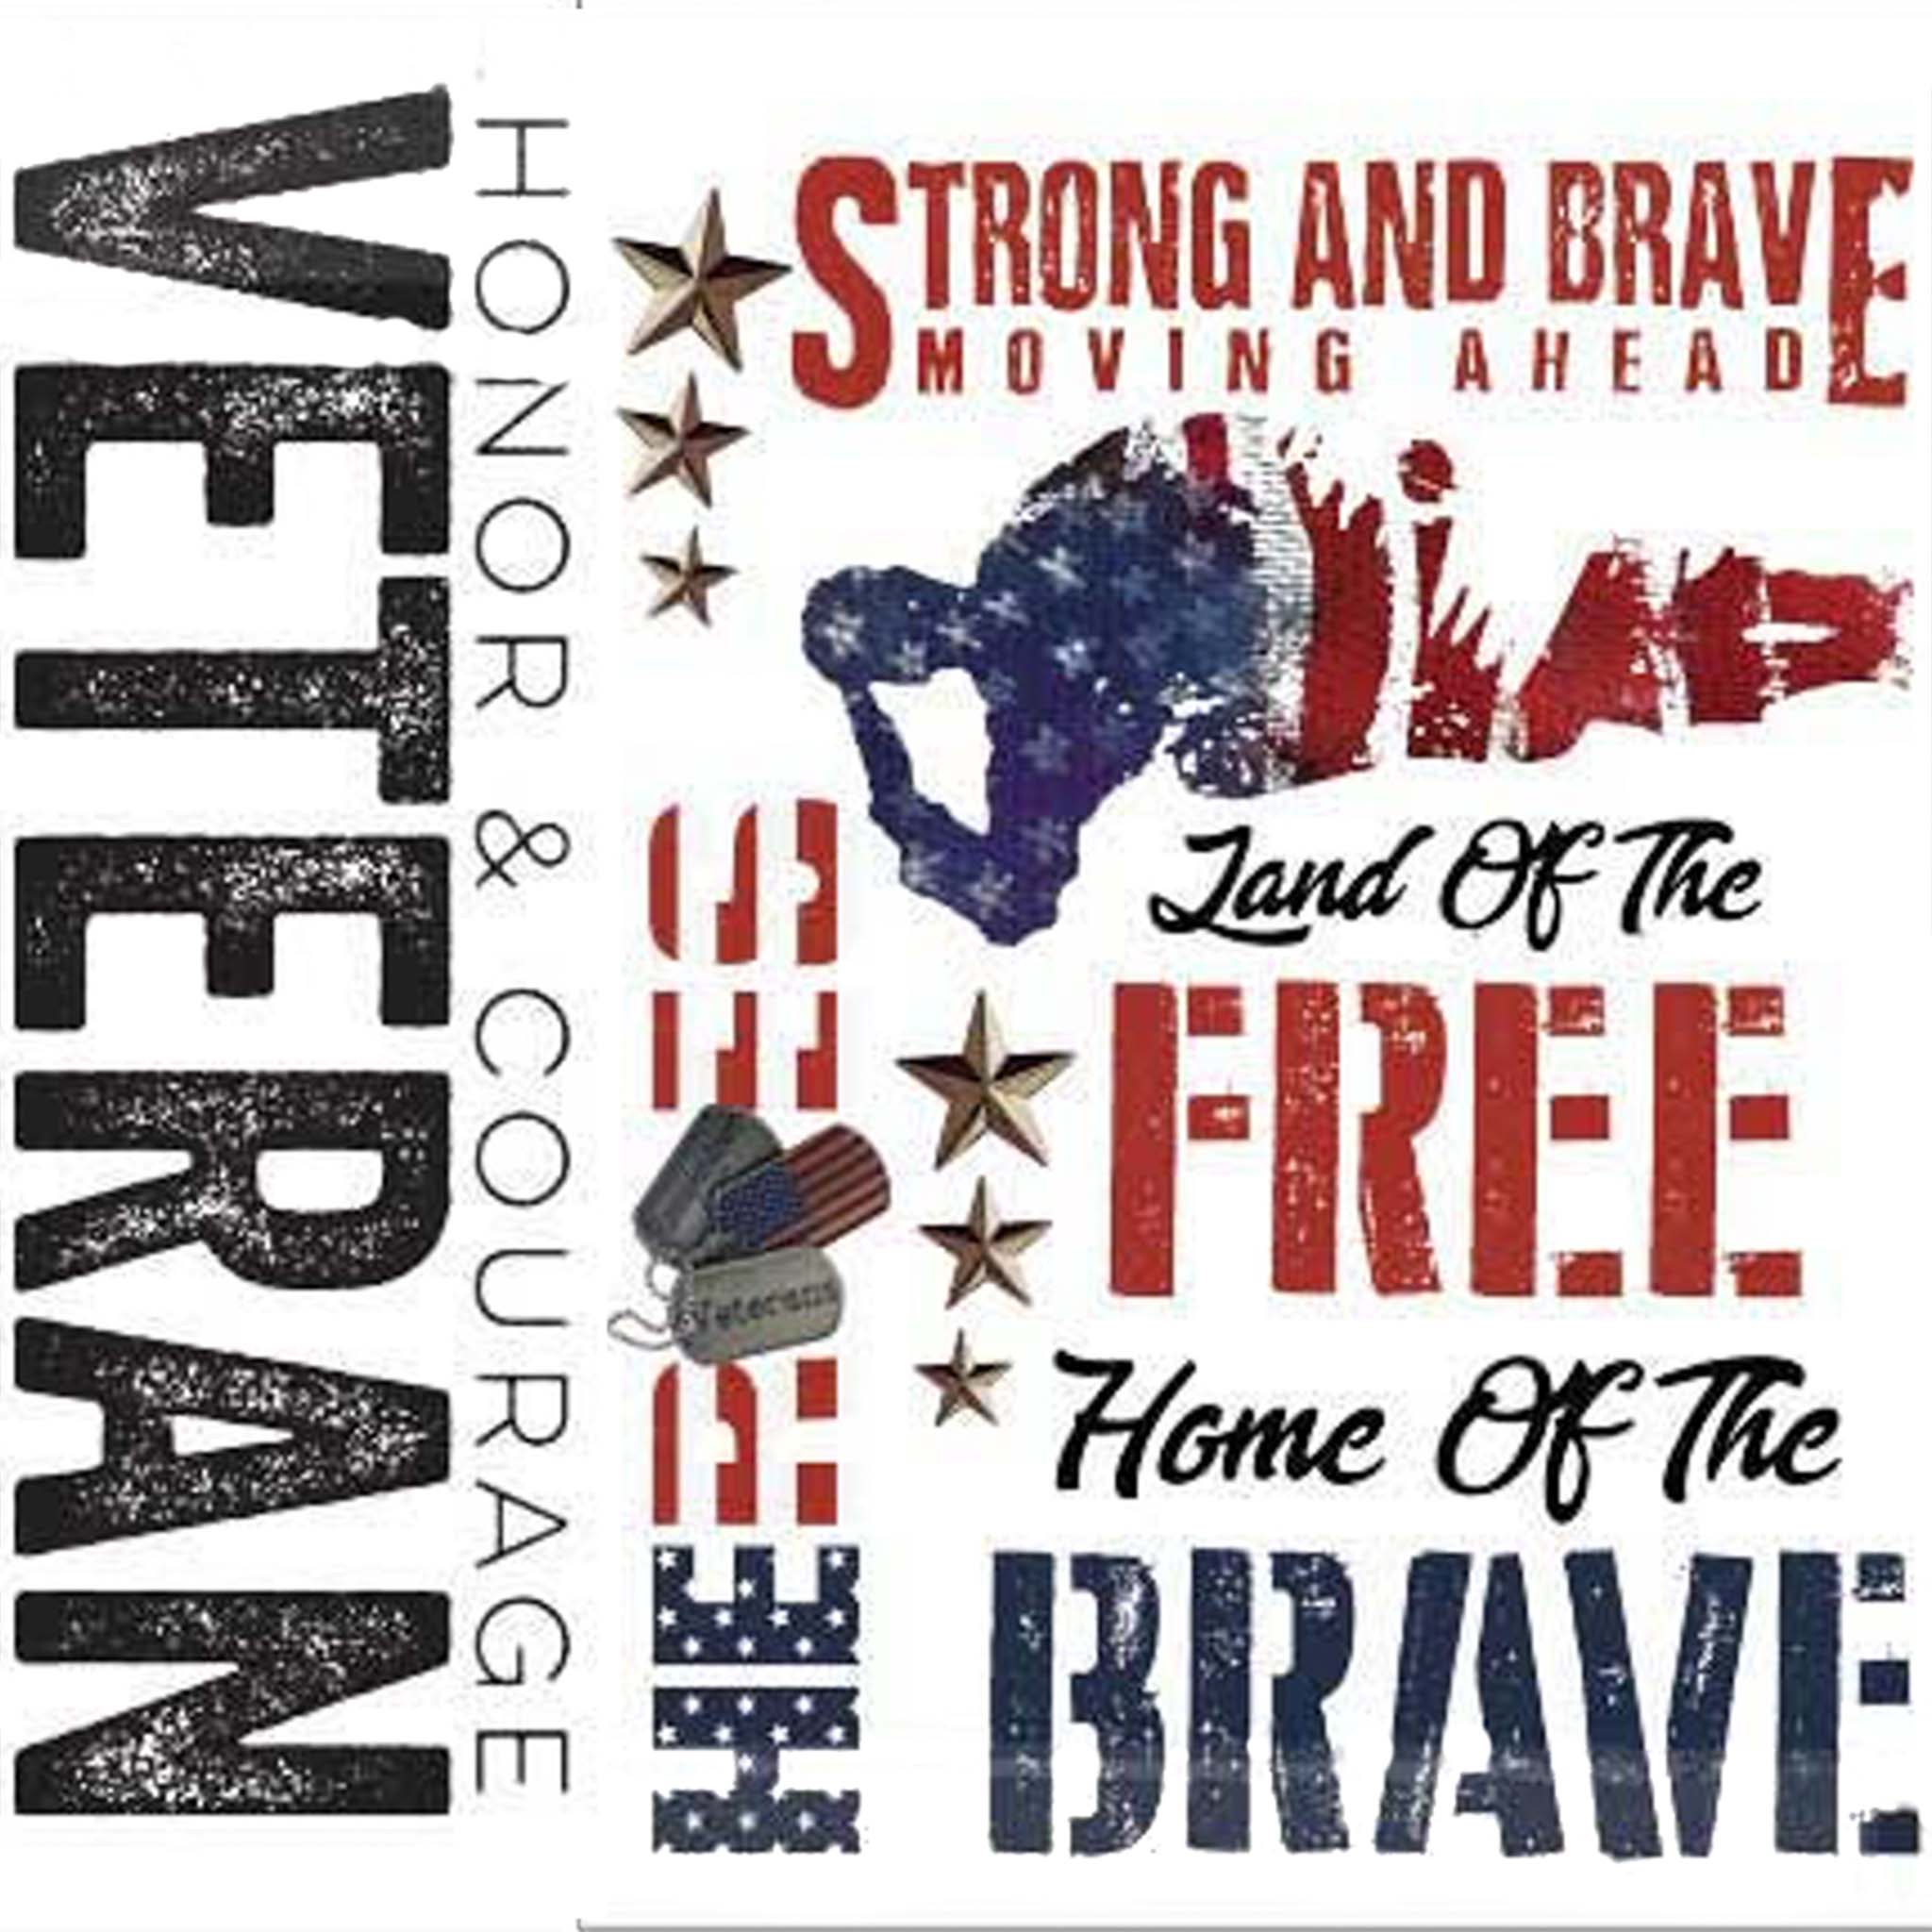 Small rub-on transfers of veteran themed words and sayings like "honor & courage, strong and brave moving ahead, land of the free, home of the brave, heroes, and veteran" in the colors of the American flag.